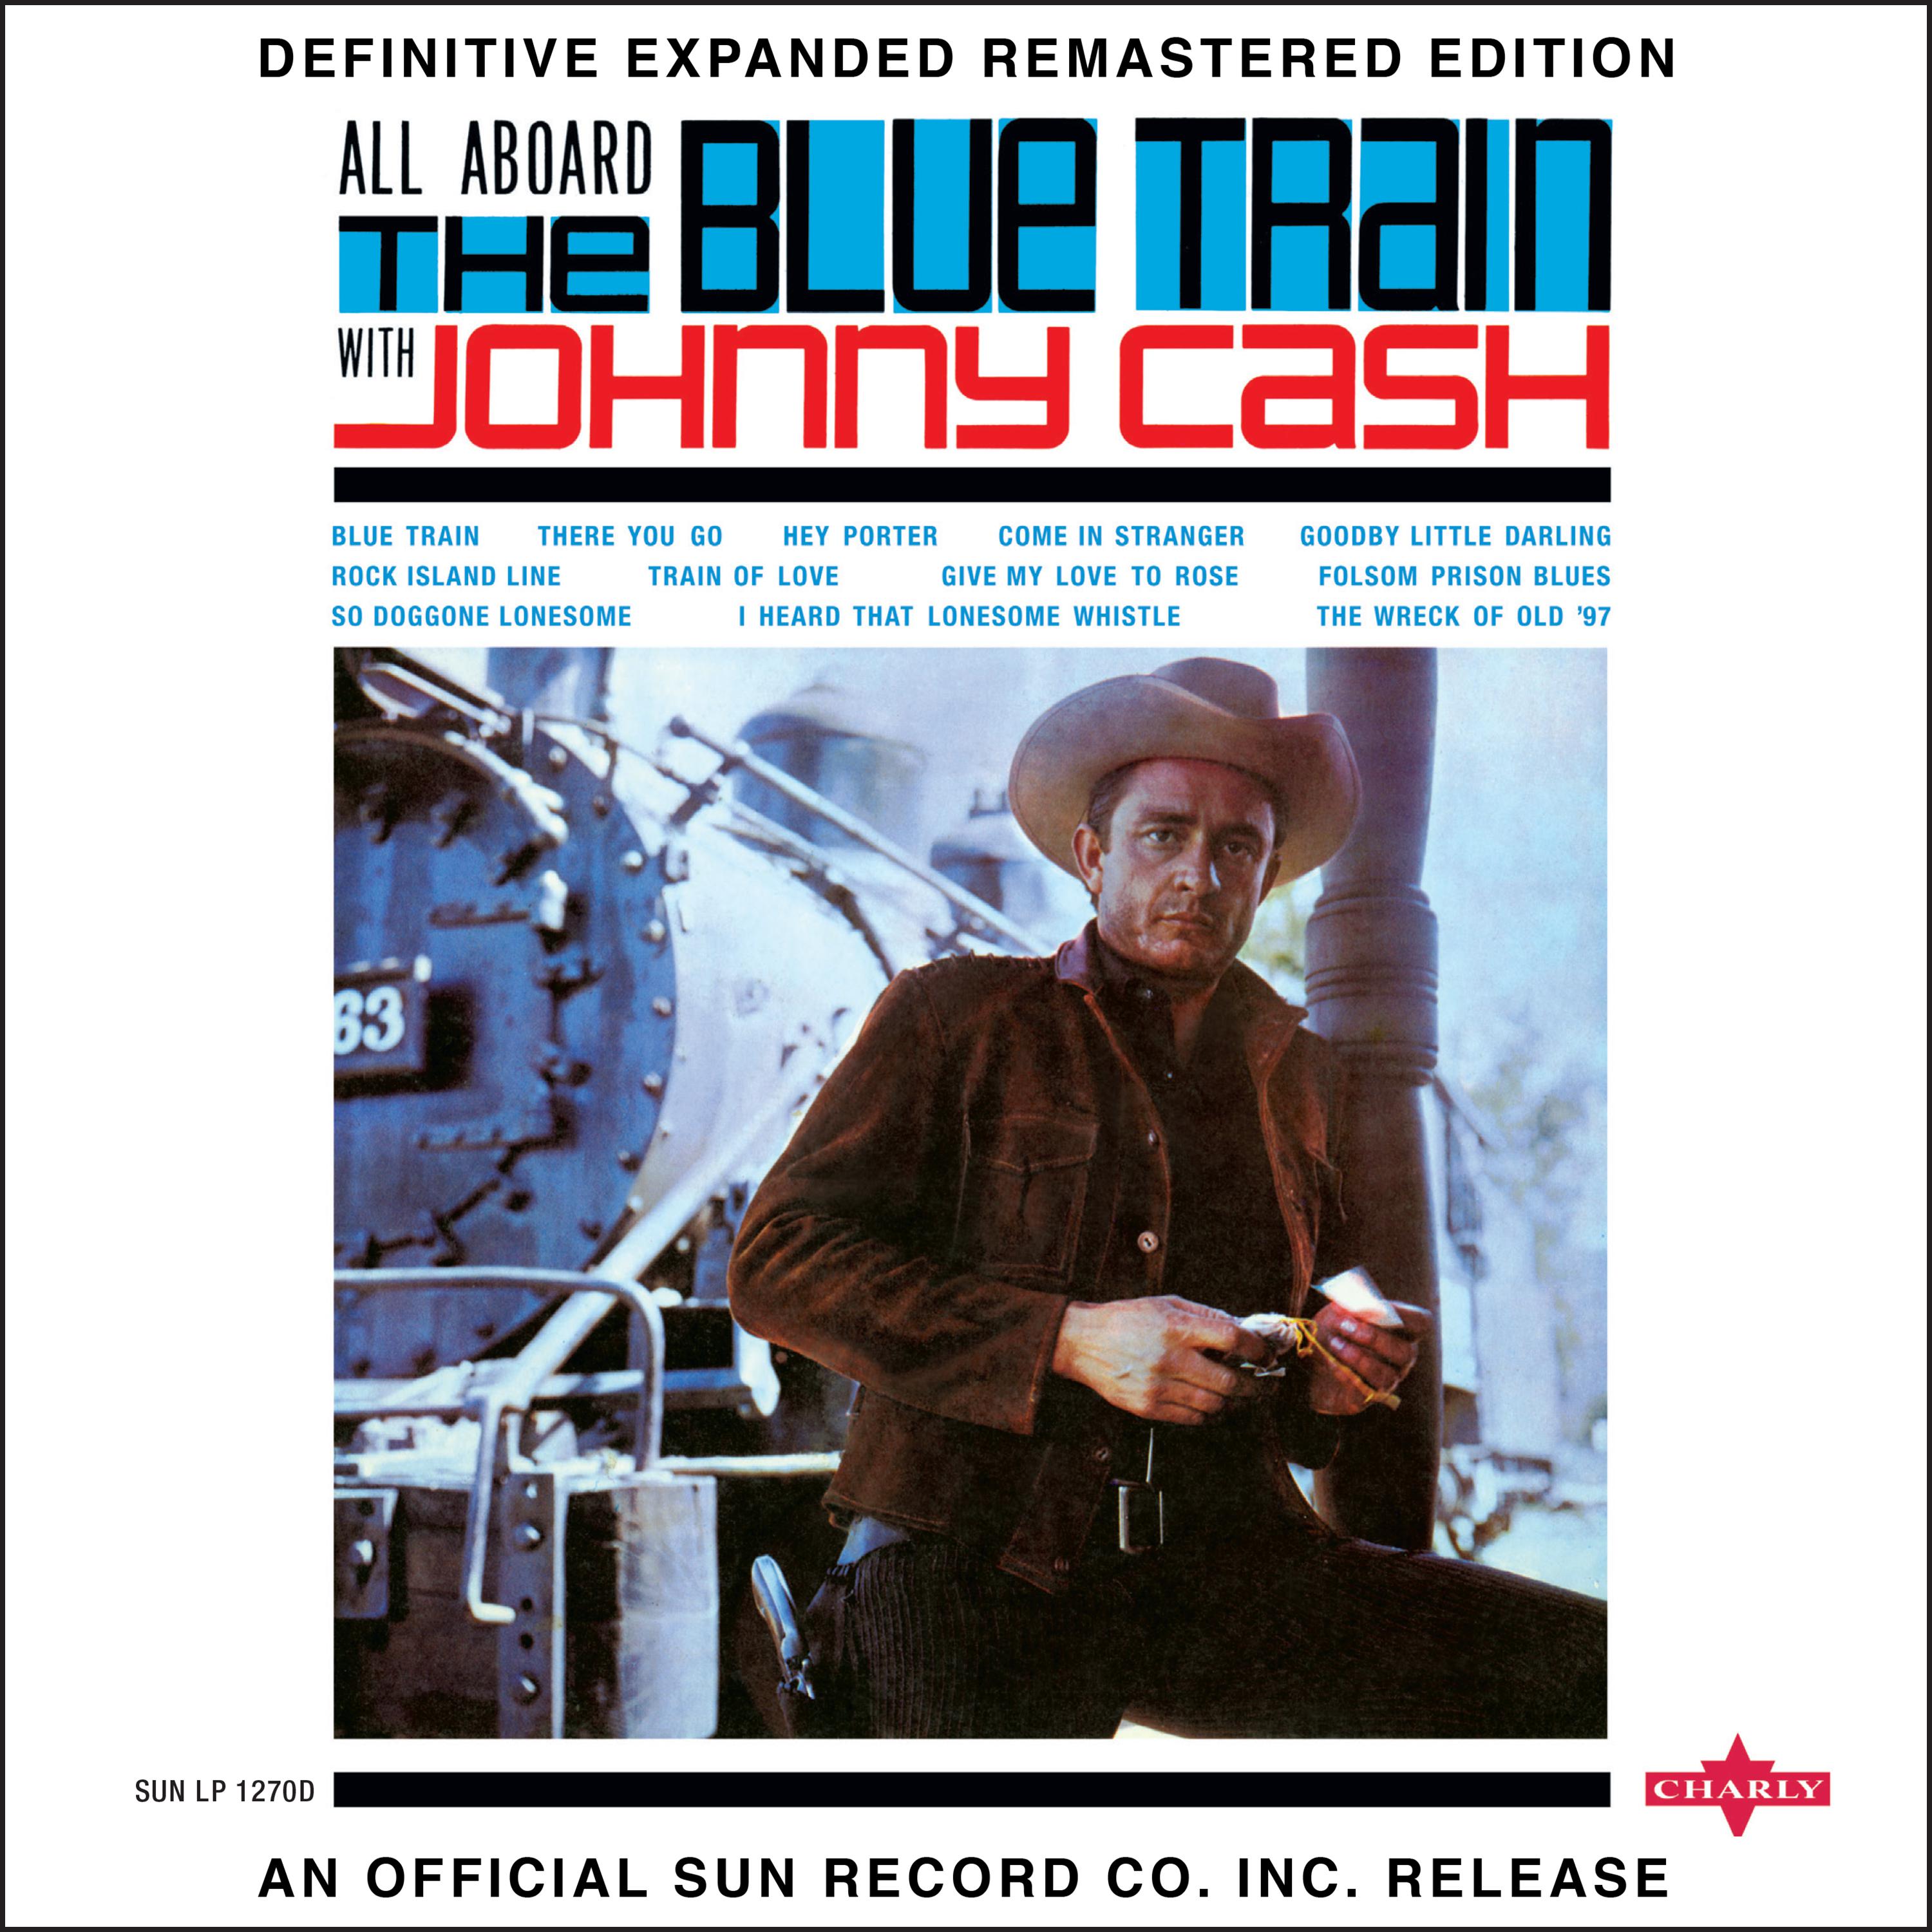 All Aboard the Blue Train (2017 Definitive Expanded Remastered Edition)